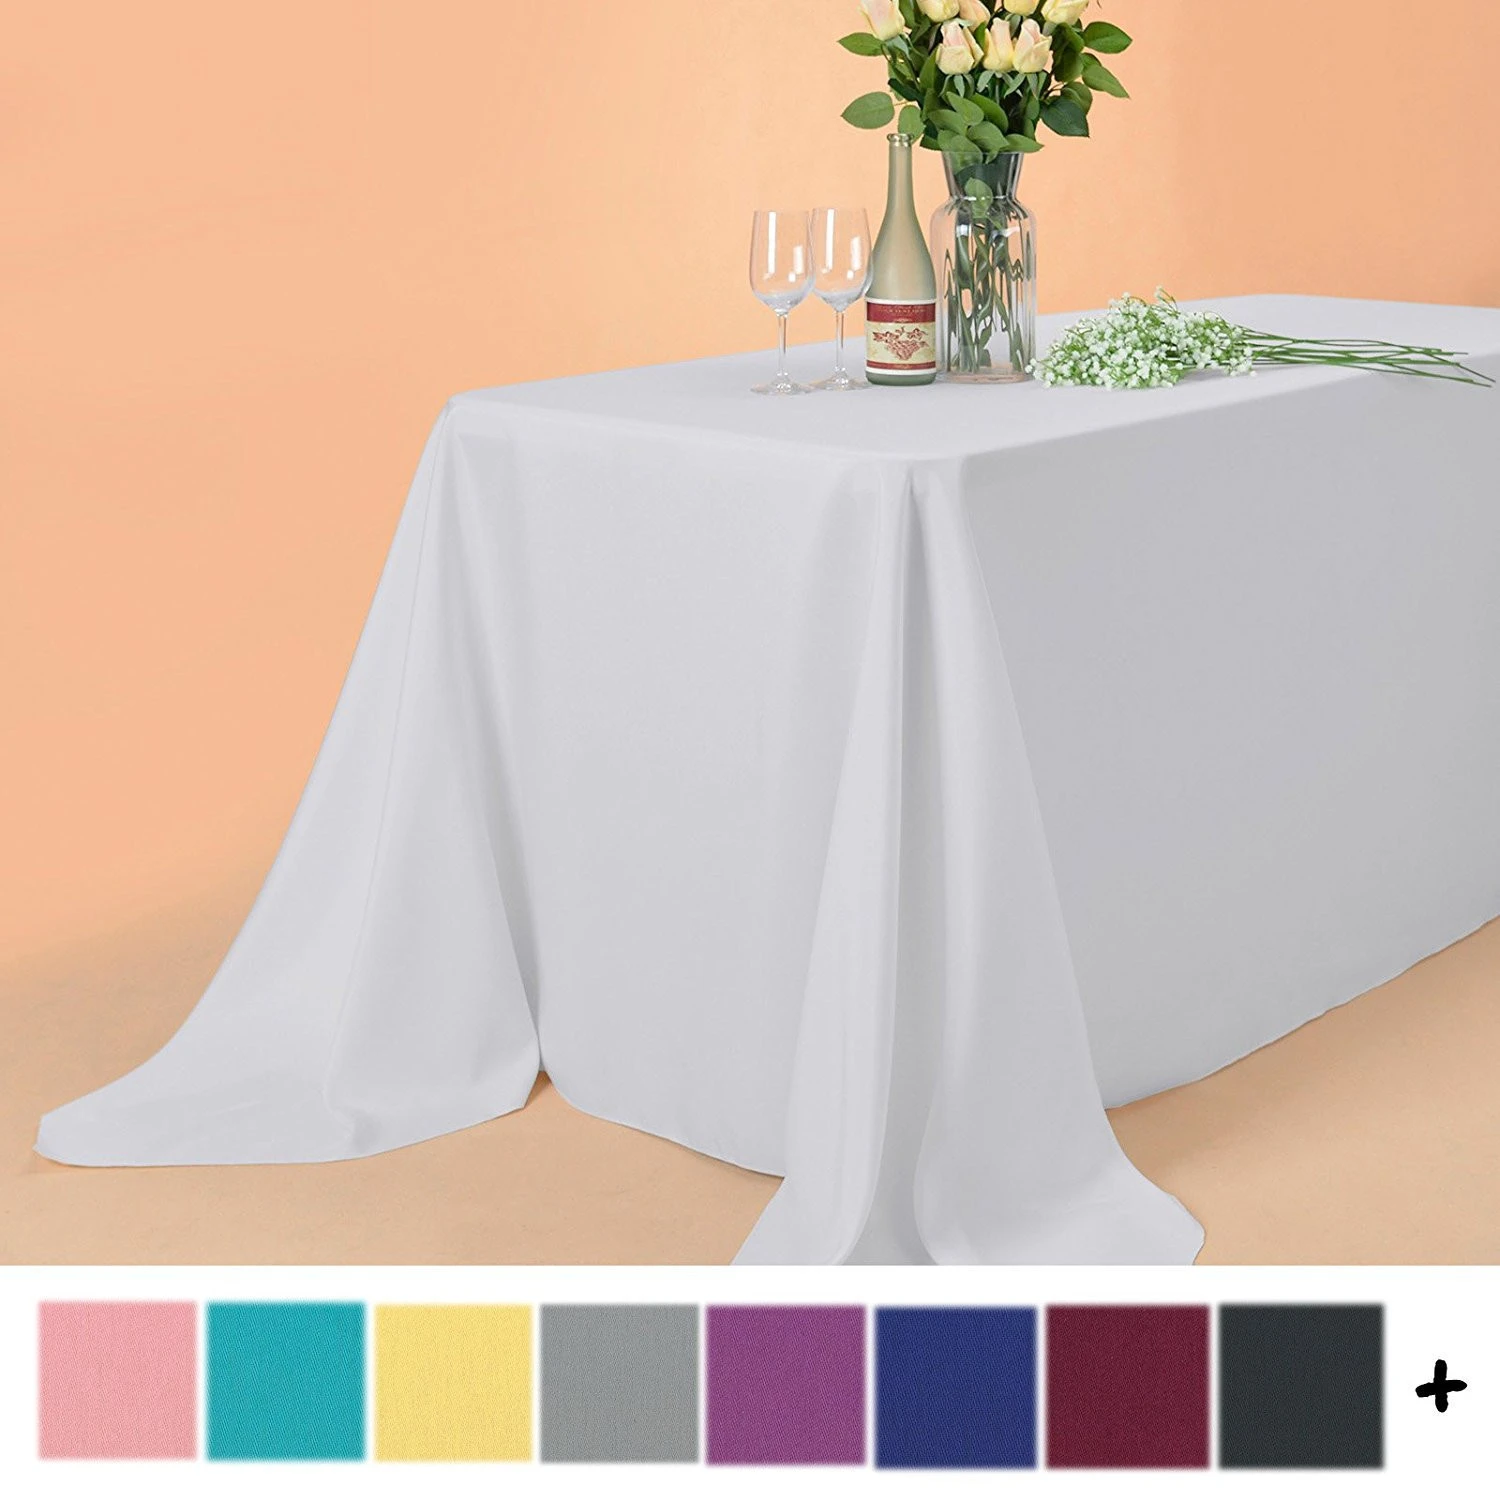 Competitive Price Good Feedback white Customize Size Tablecloths Party Table Cover